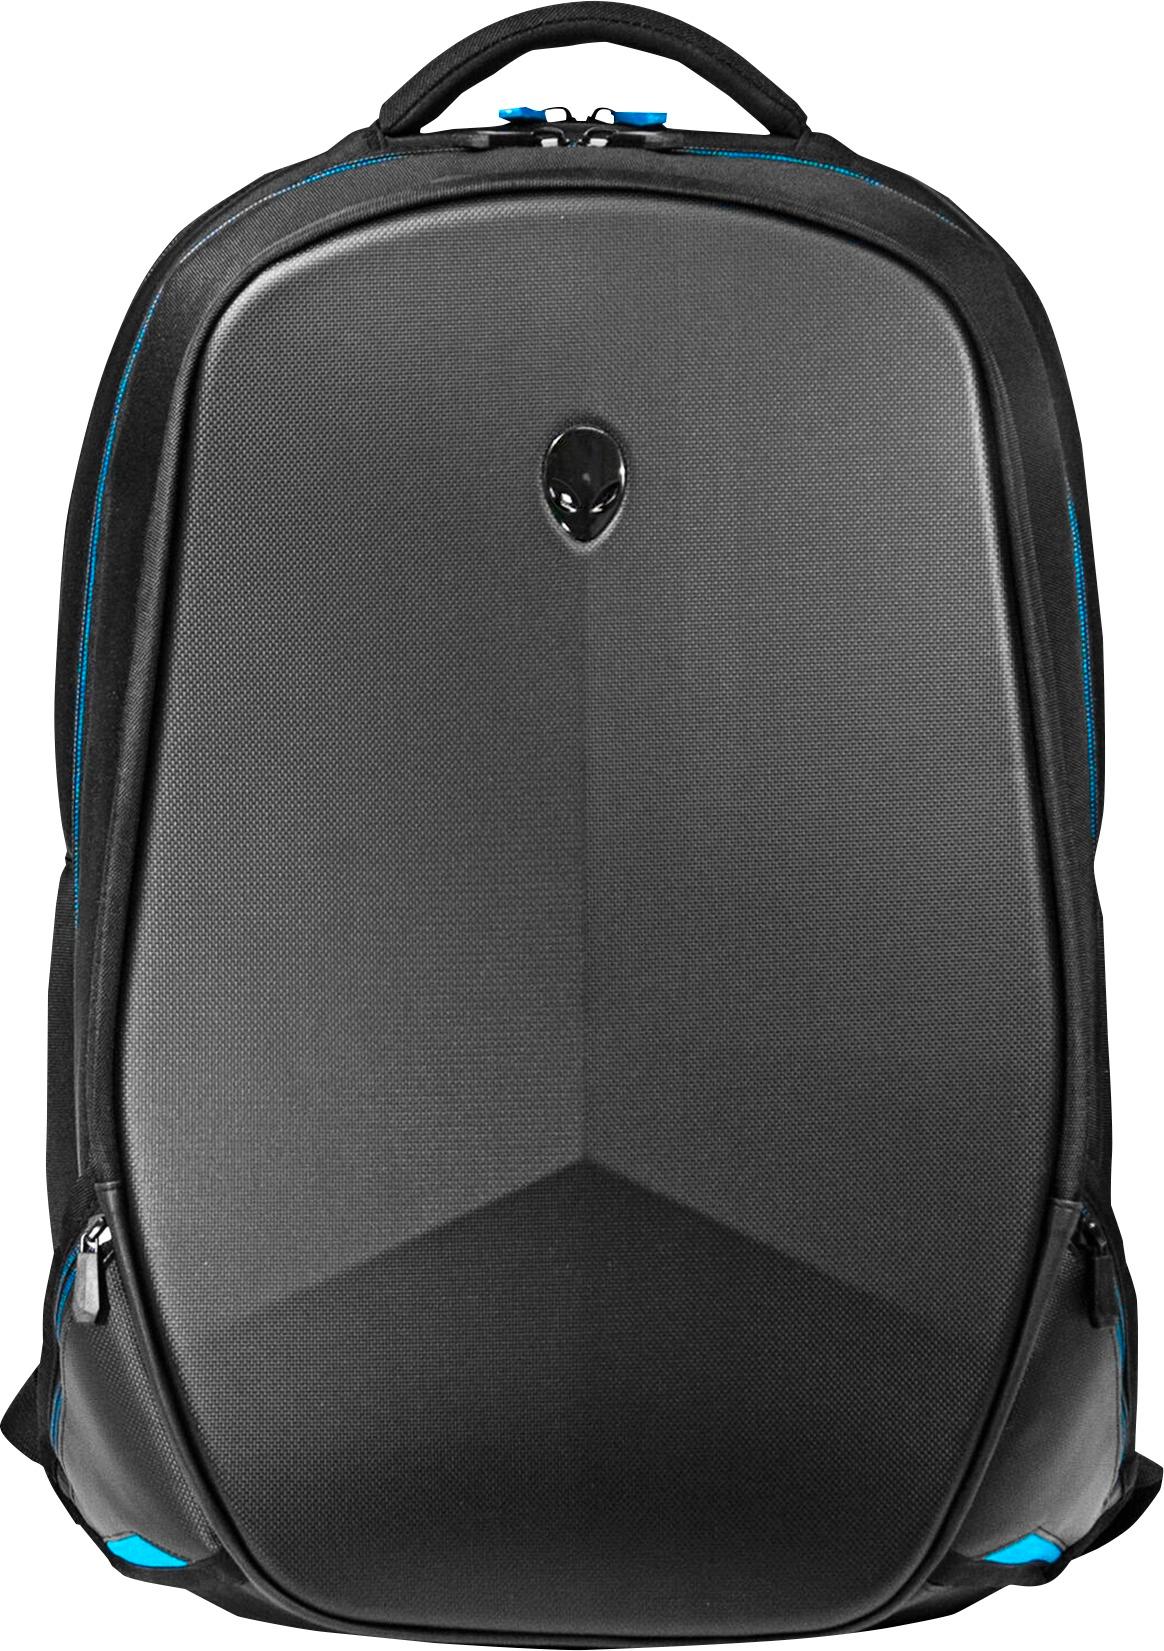 Questions and Answers: Alienware Vindicator 2.0 Laptop Gaming Backpack ...